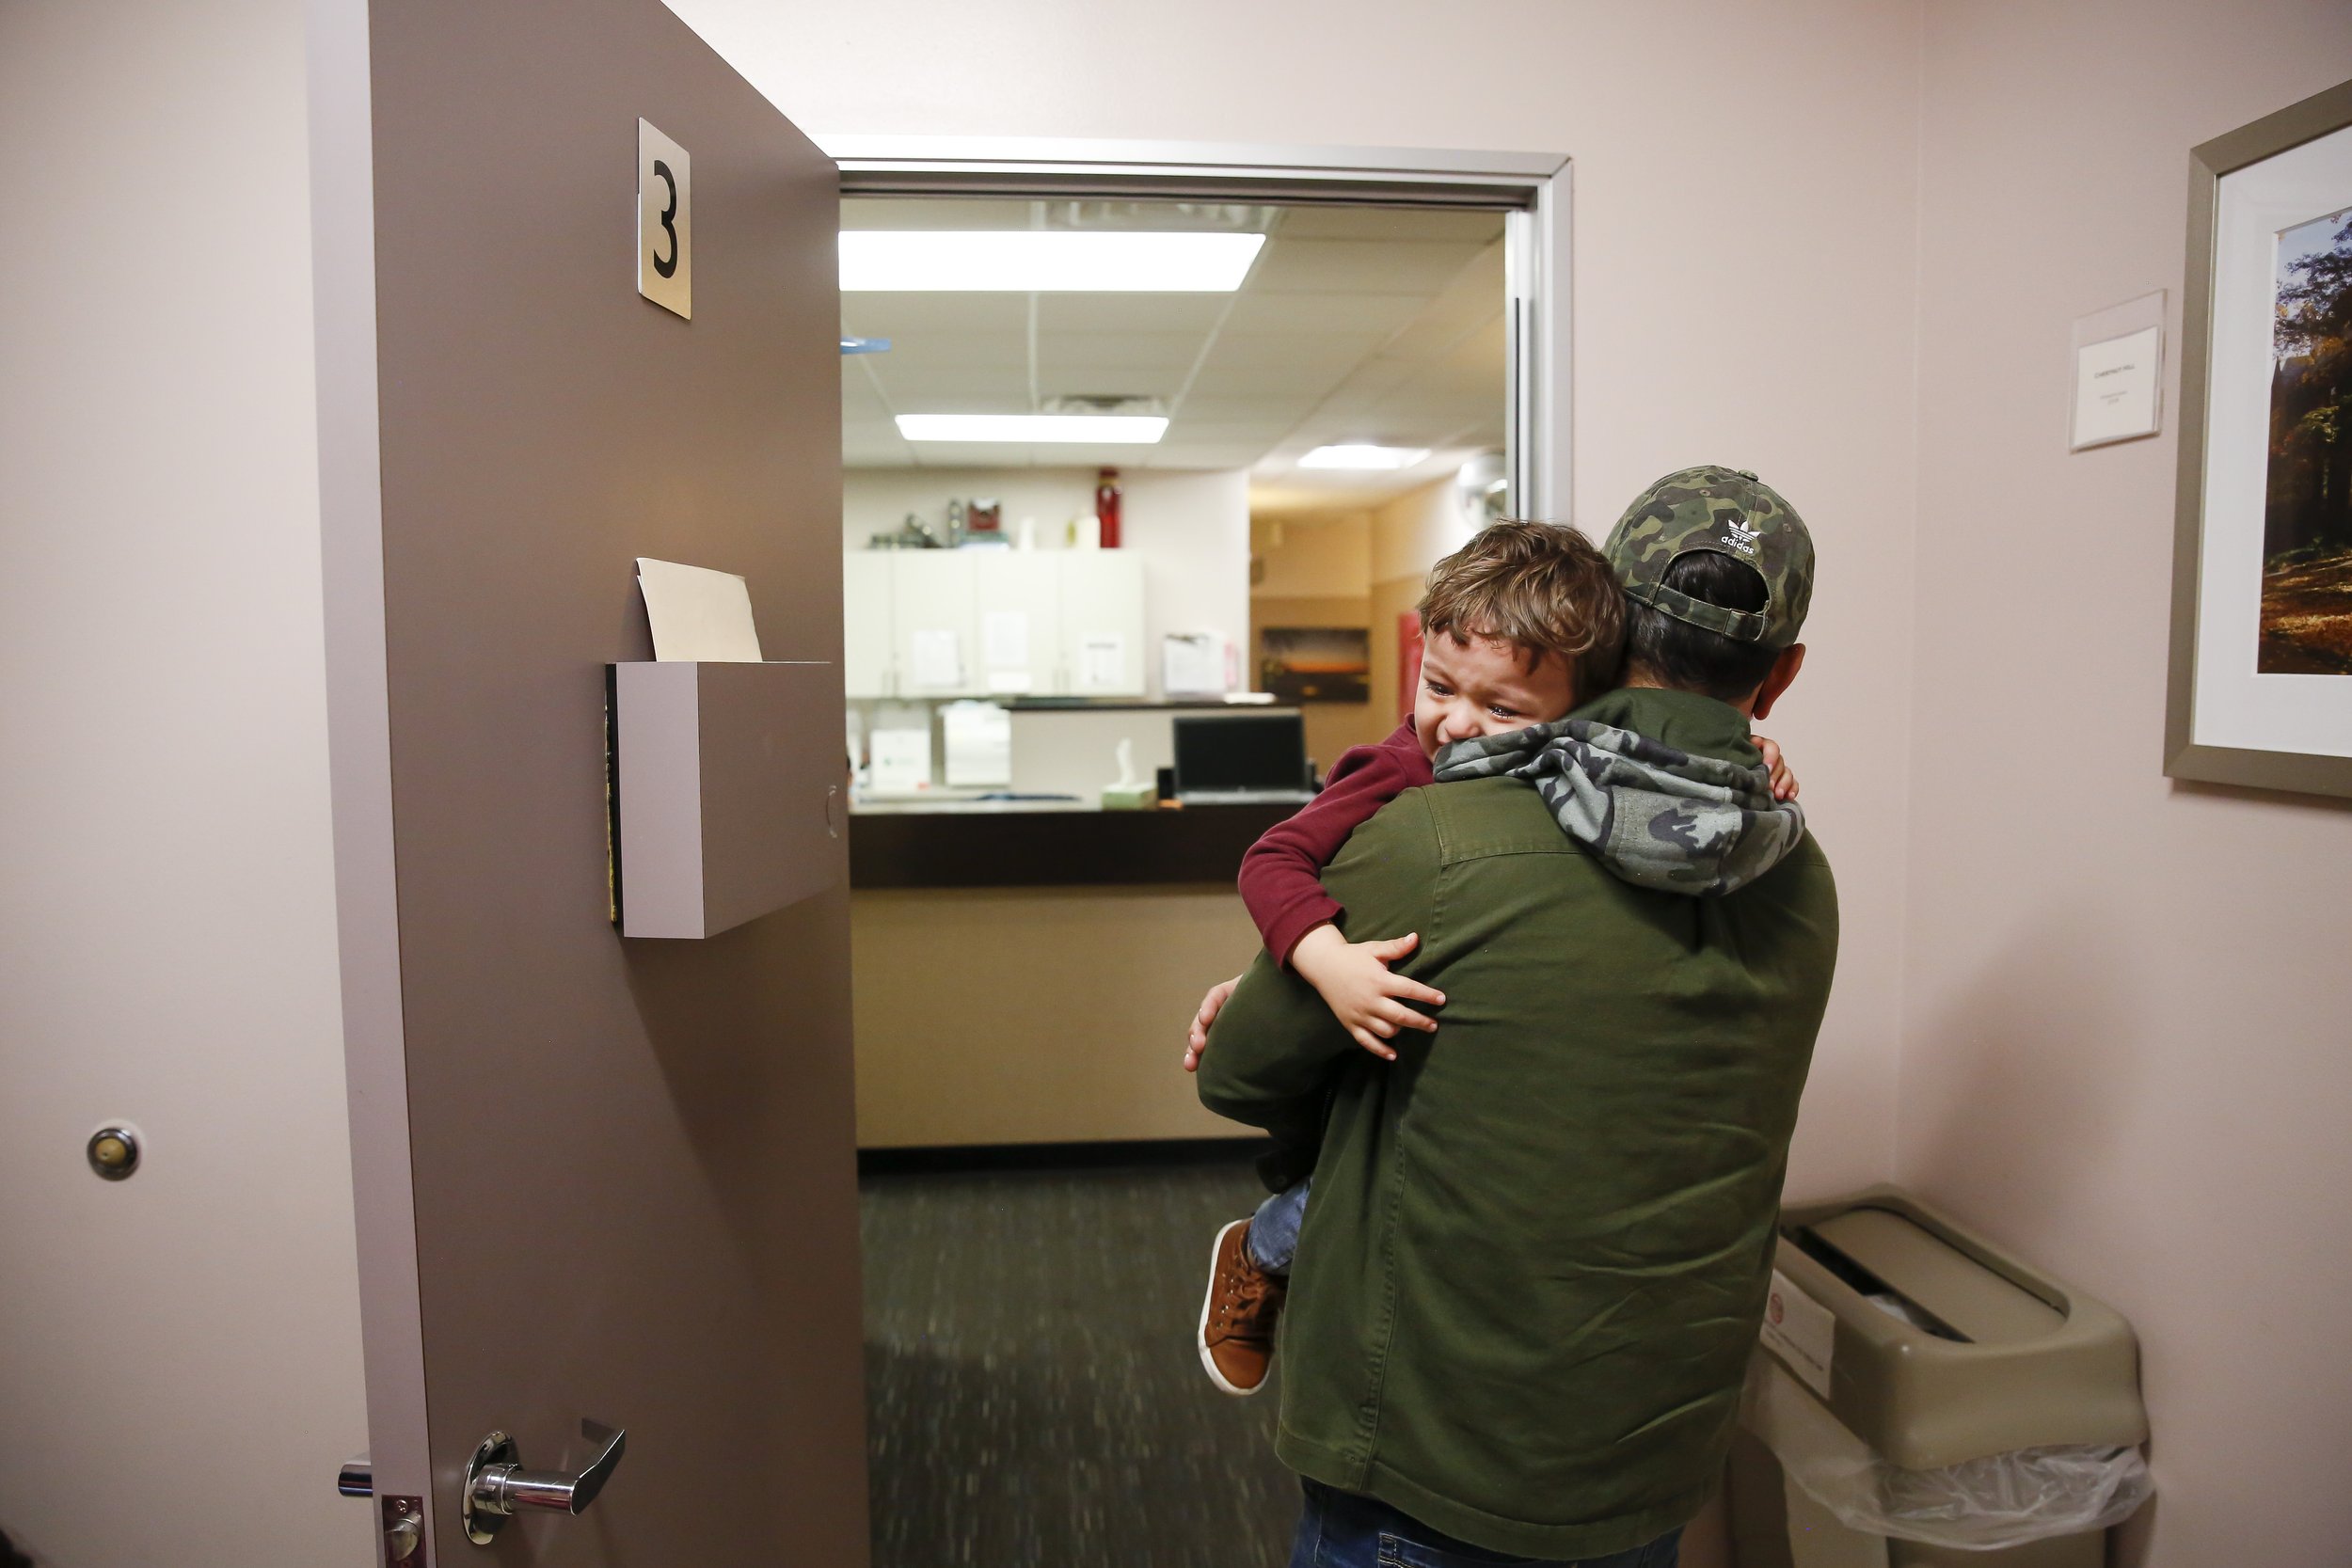  Najibullah Mohammadi carries his crying son Yasar (2) out of the patient room at the doctor’s office during Susan’s OBGYN appointment in Sacramento, Calif. on Thursday, April 21, 2022. Najibullah Mohammadi, his wife Susan, their two young children Z